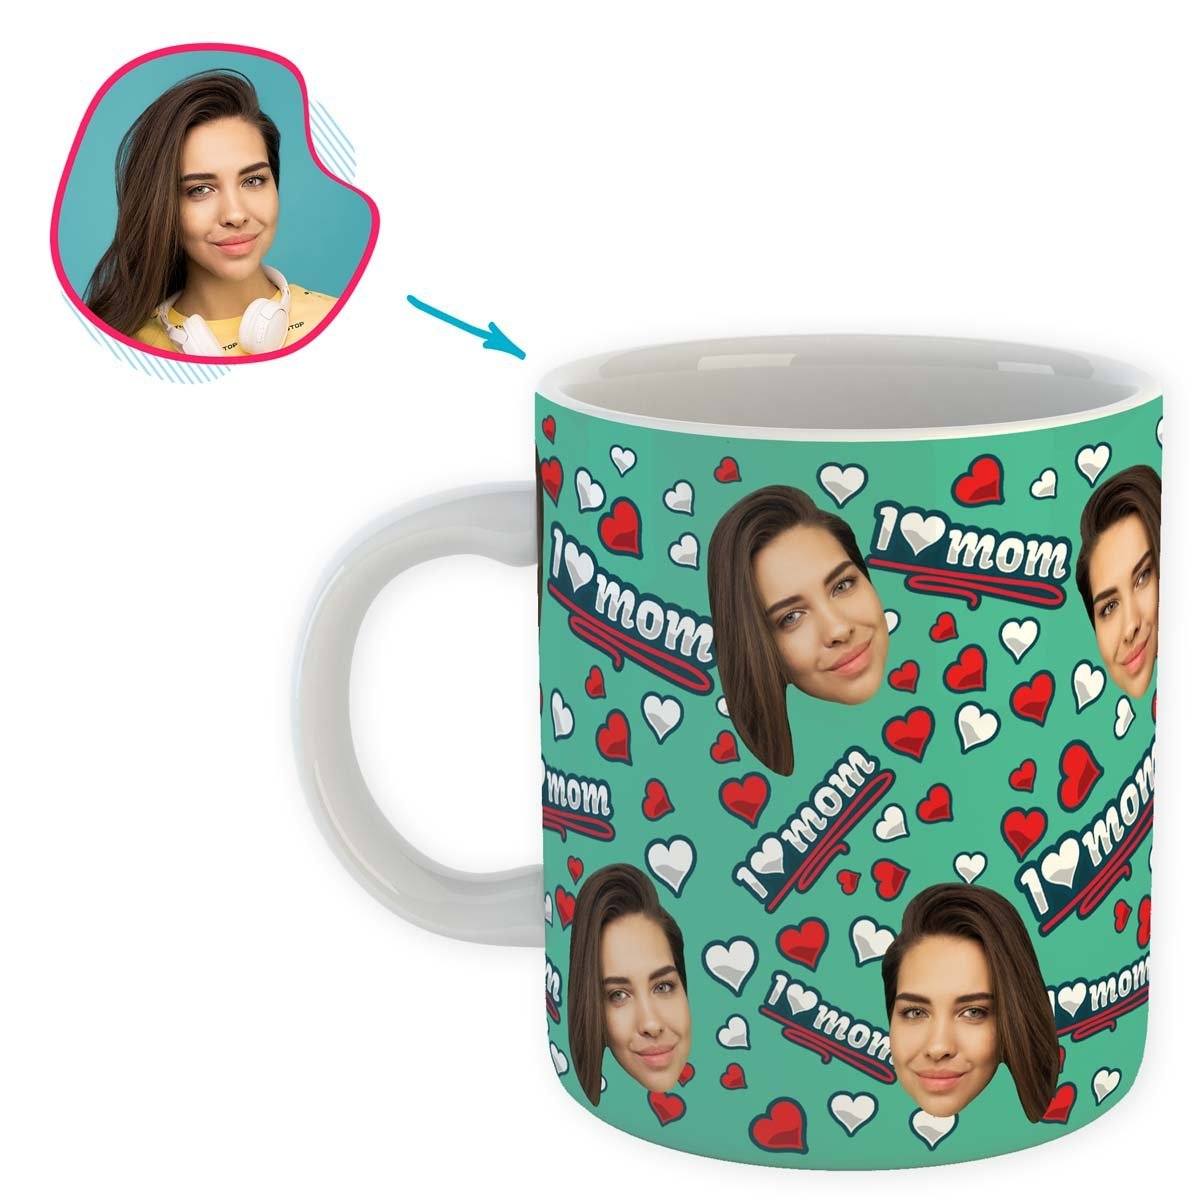 mint Love Mom mug personalized with photo of face printed on it